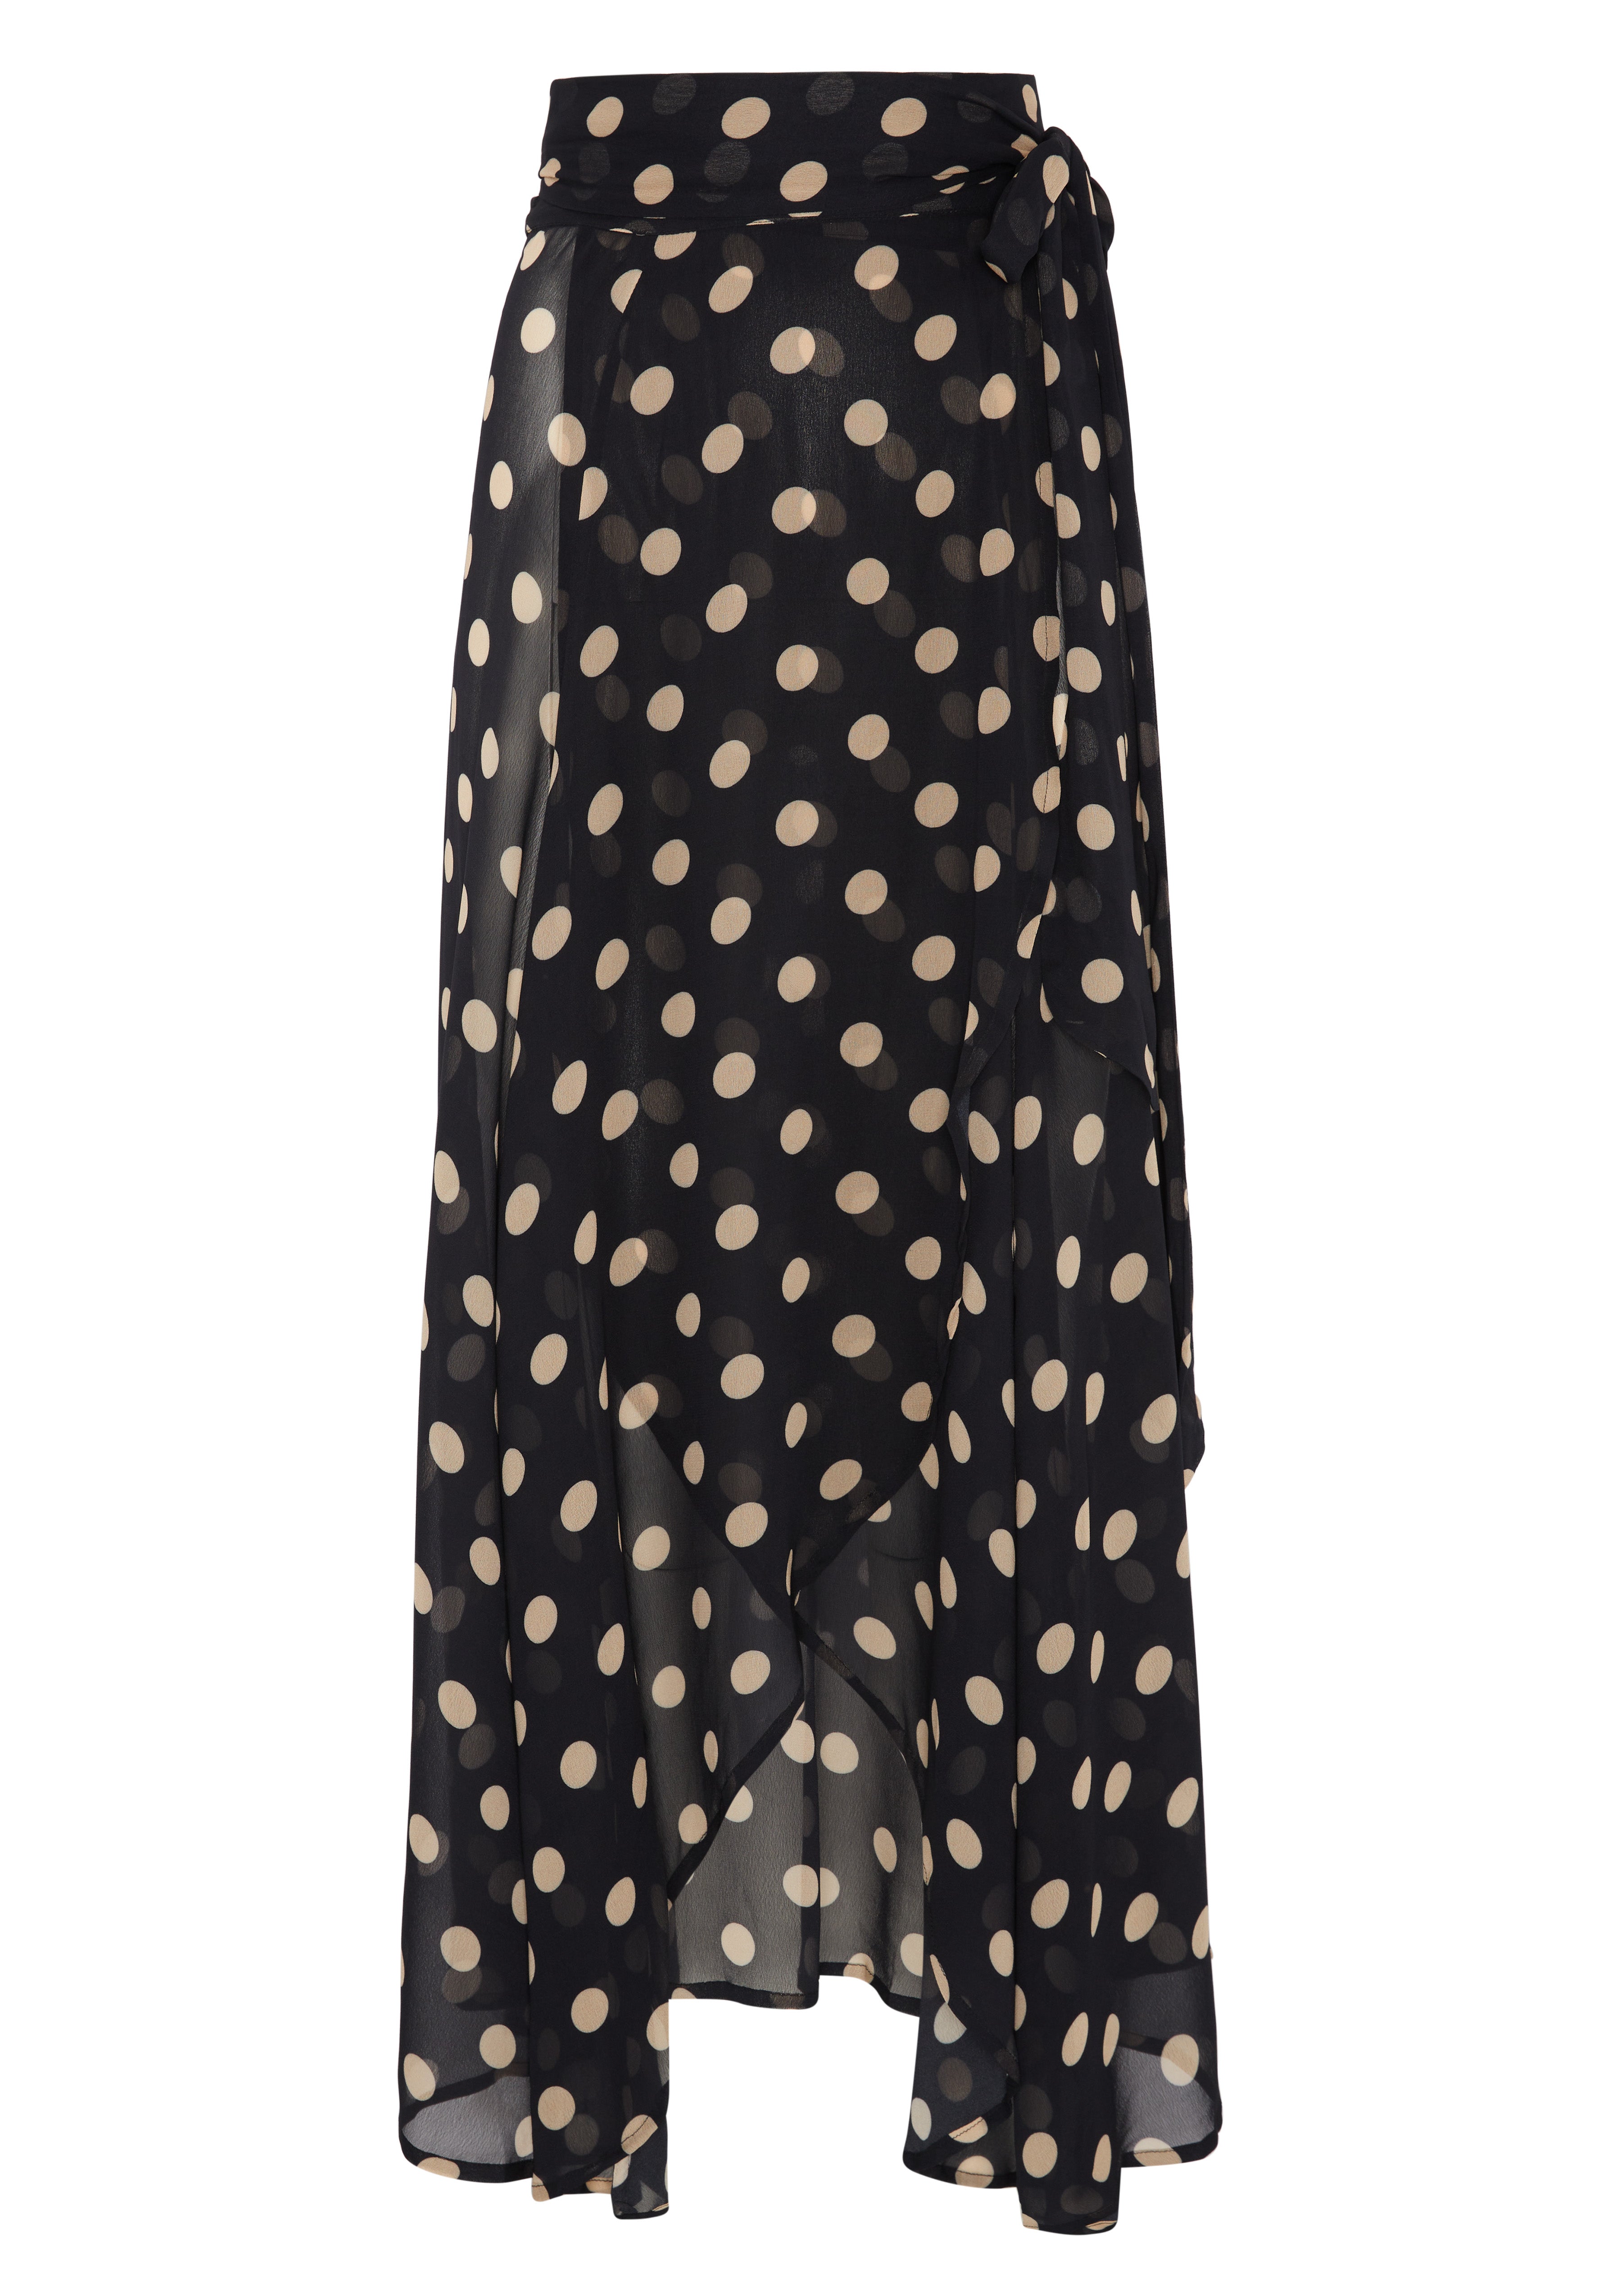 MILU SKIRT IN GEORGETTE - TOASTED ALMOND SPOT